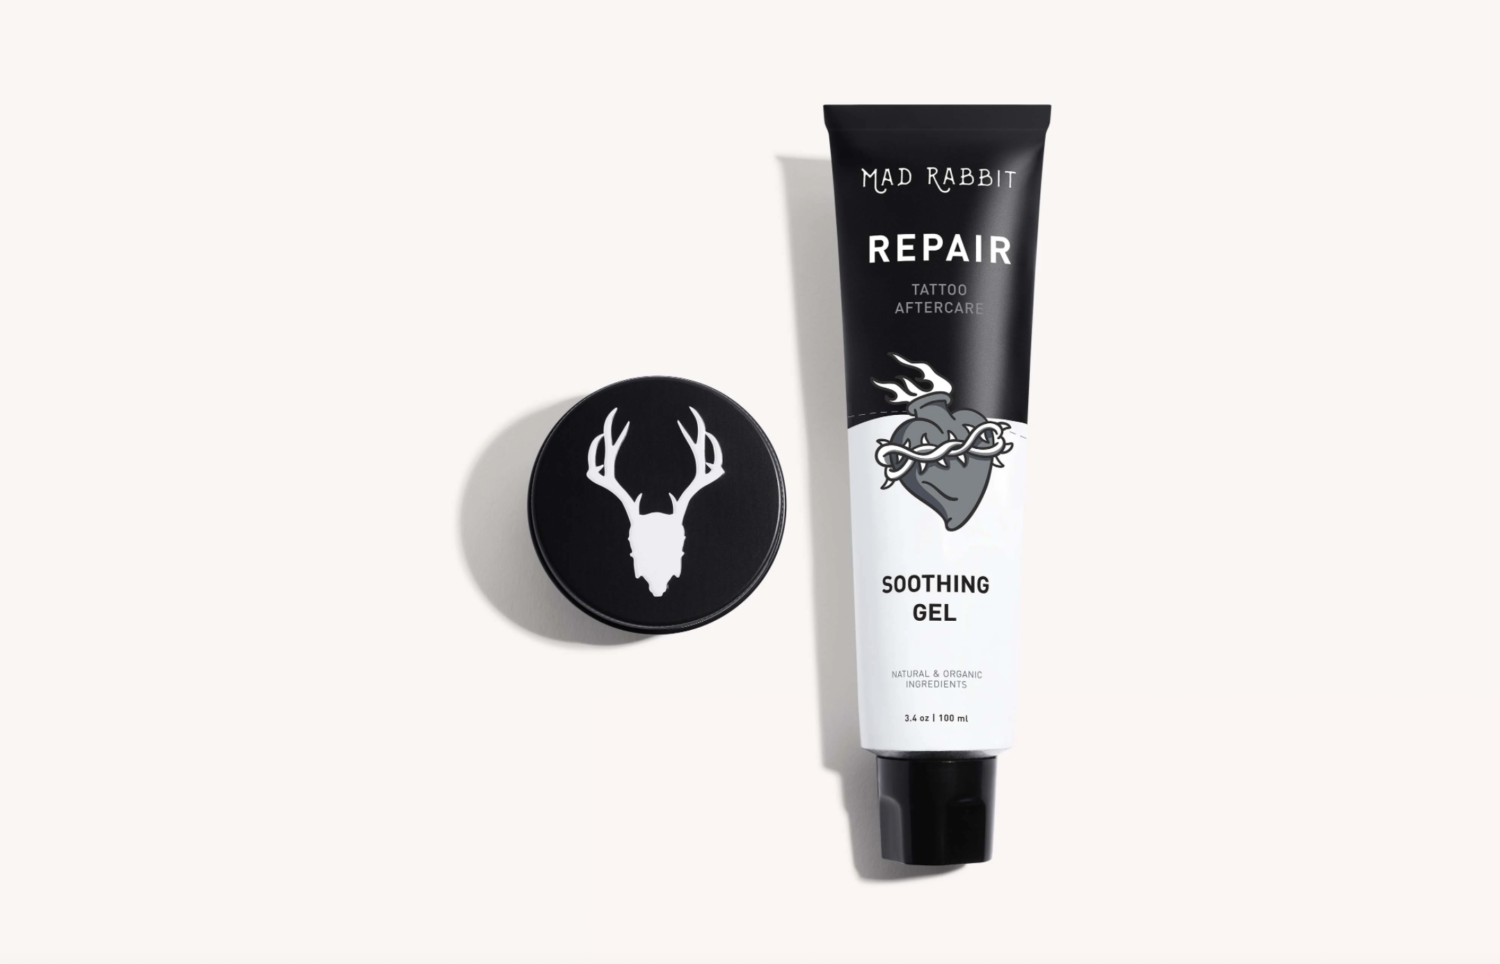 Mad Rabbit soothing gel for tattoo aftercare